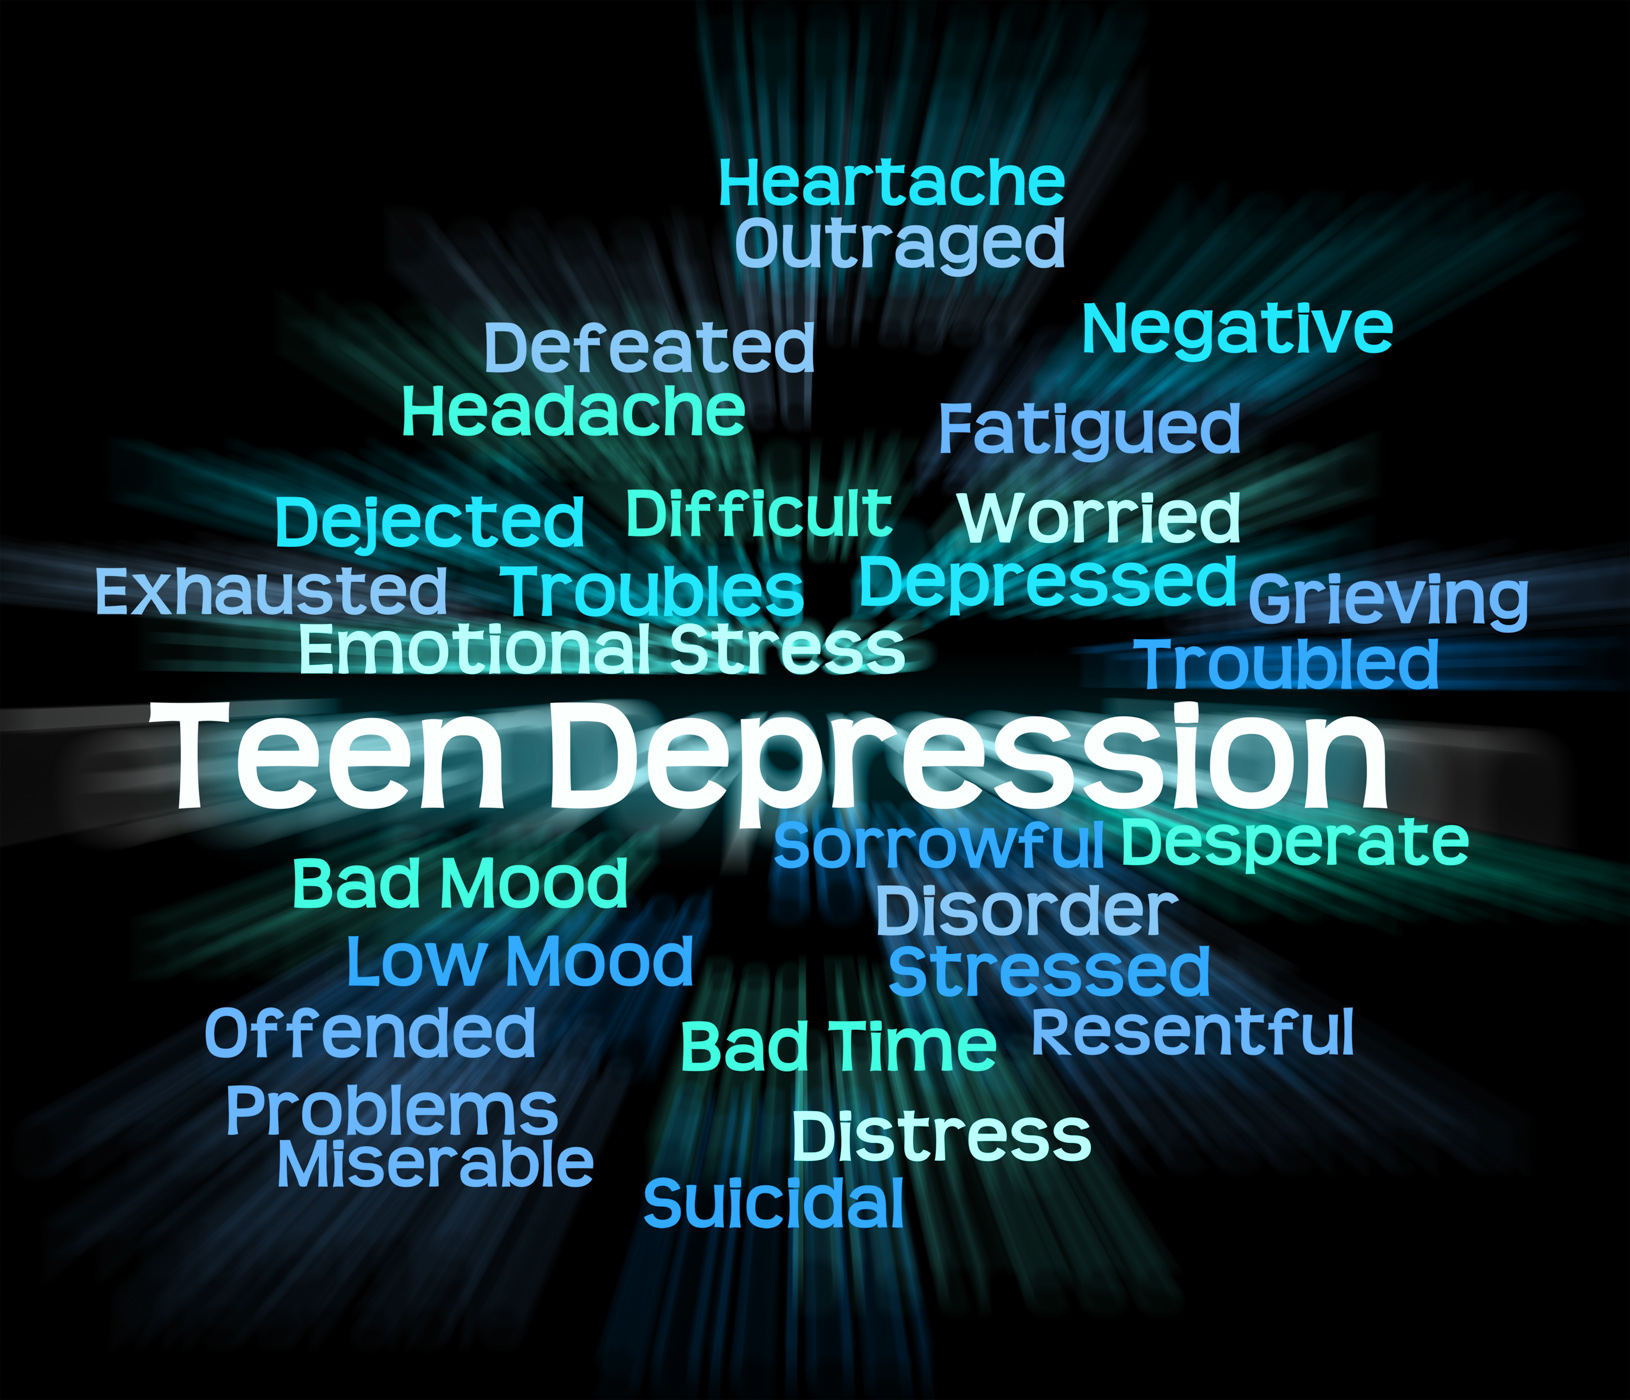 Teen depression indicates lost hope and adolescent photo